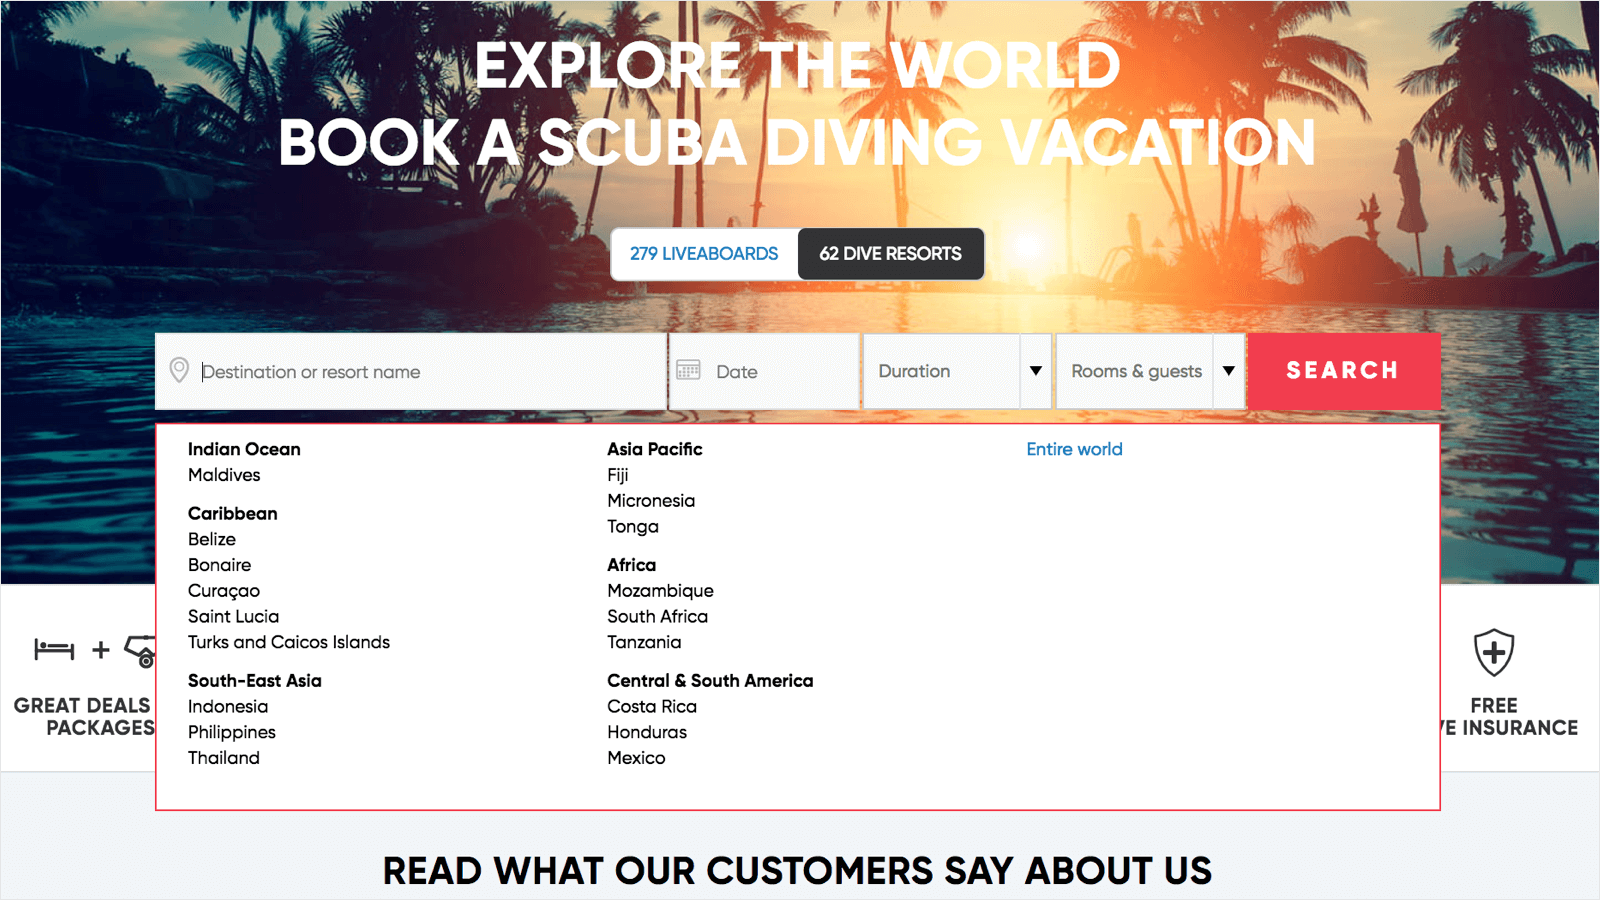 How to Develop a Travel Booking Service Like PADI Travel 7